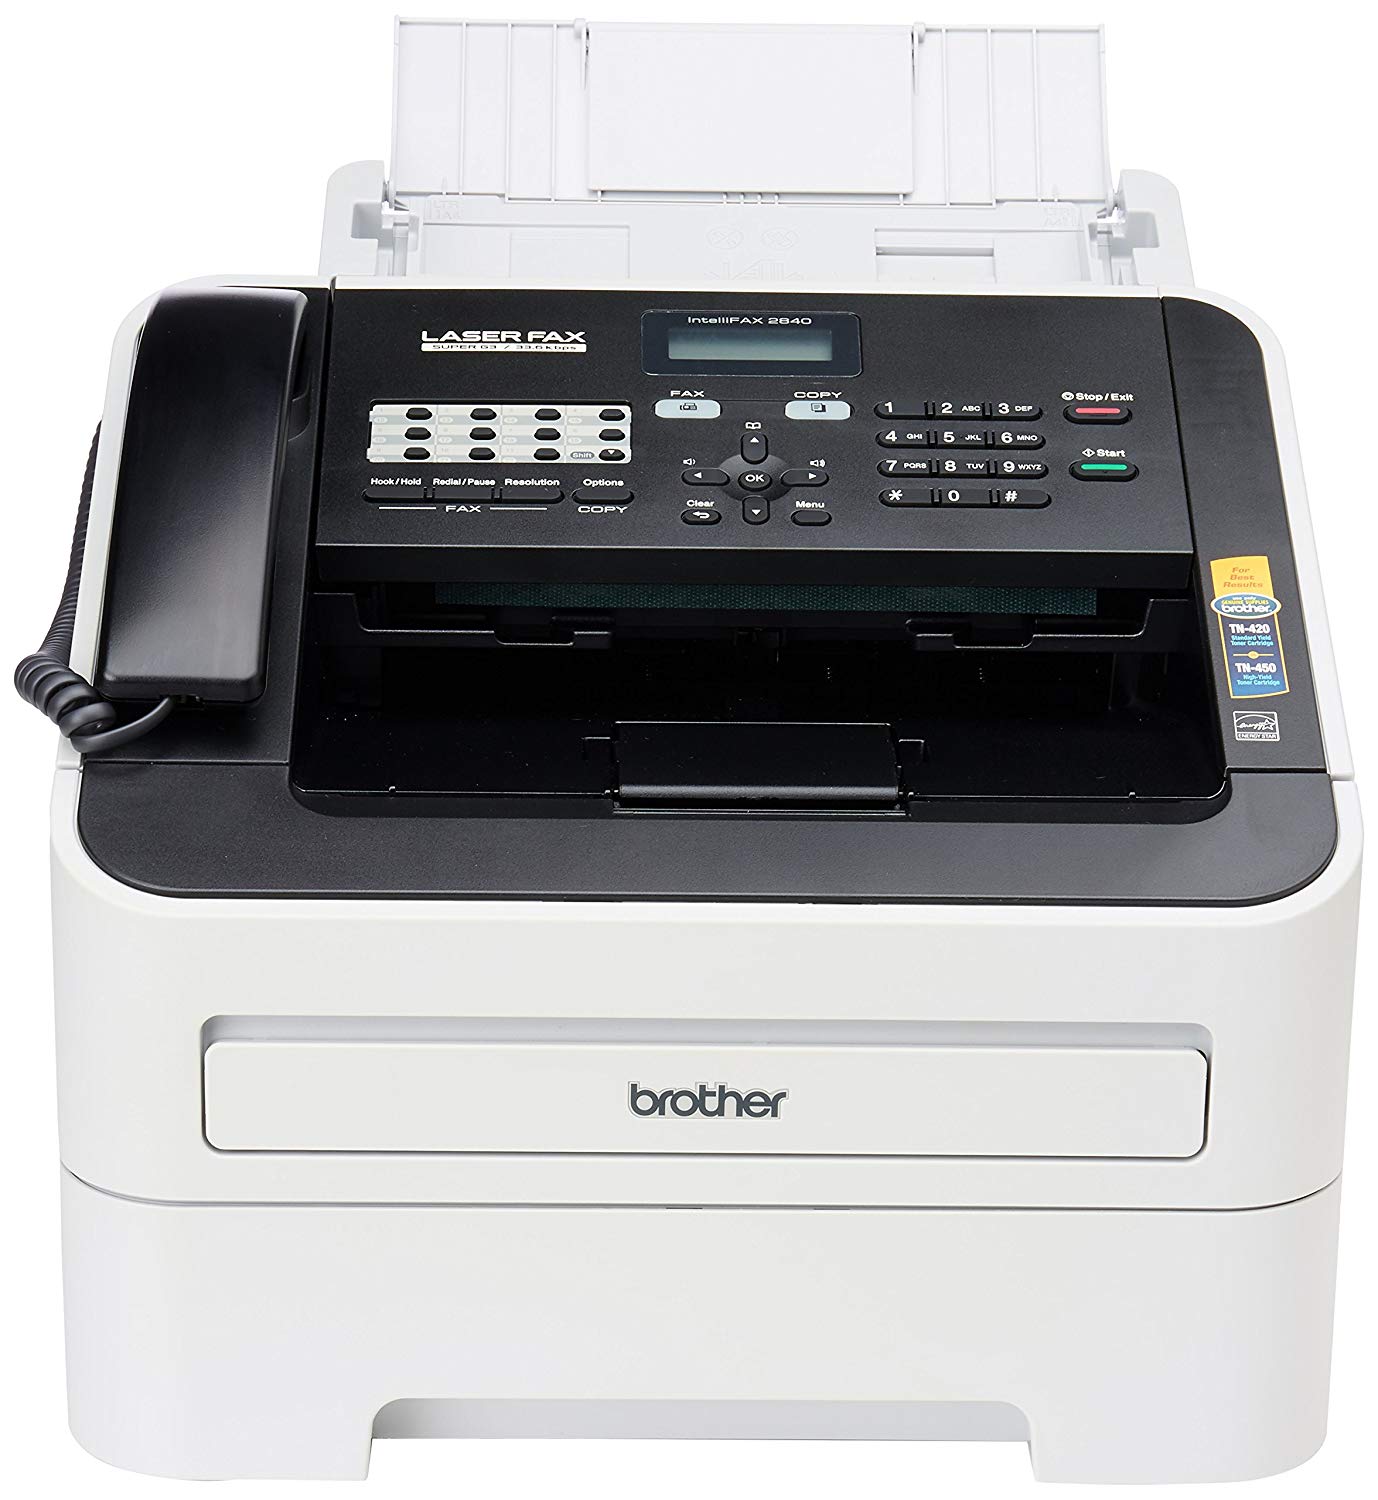 brother fax 2840 software download